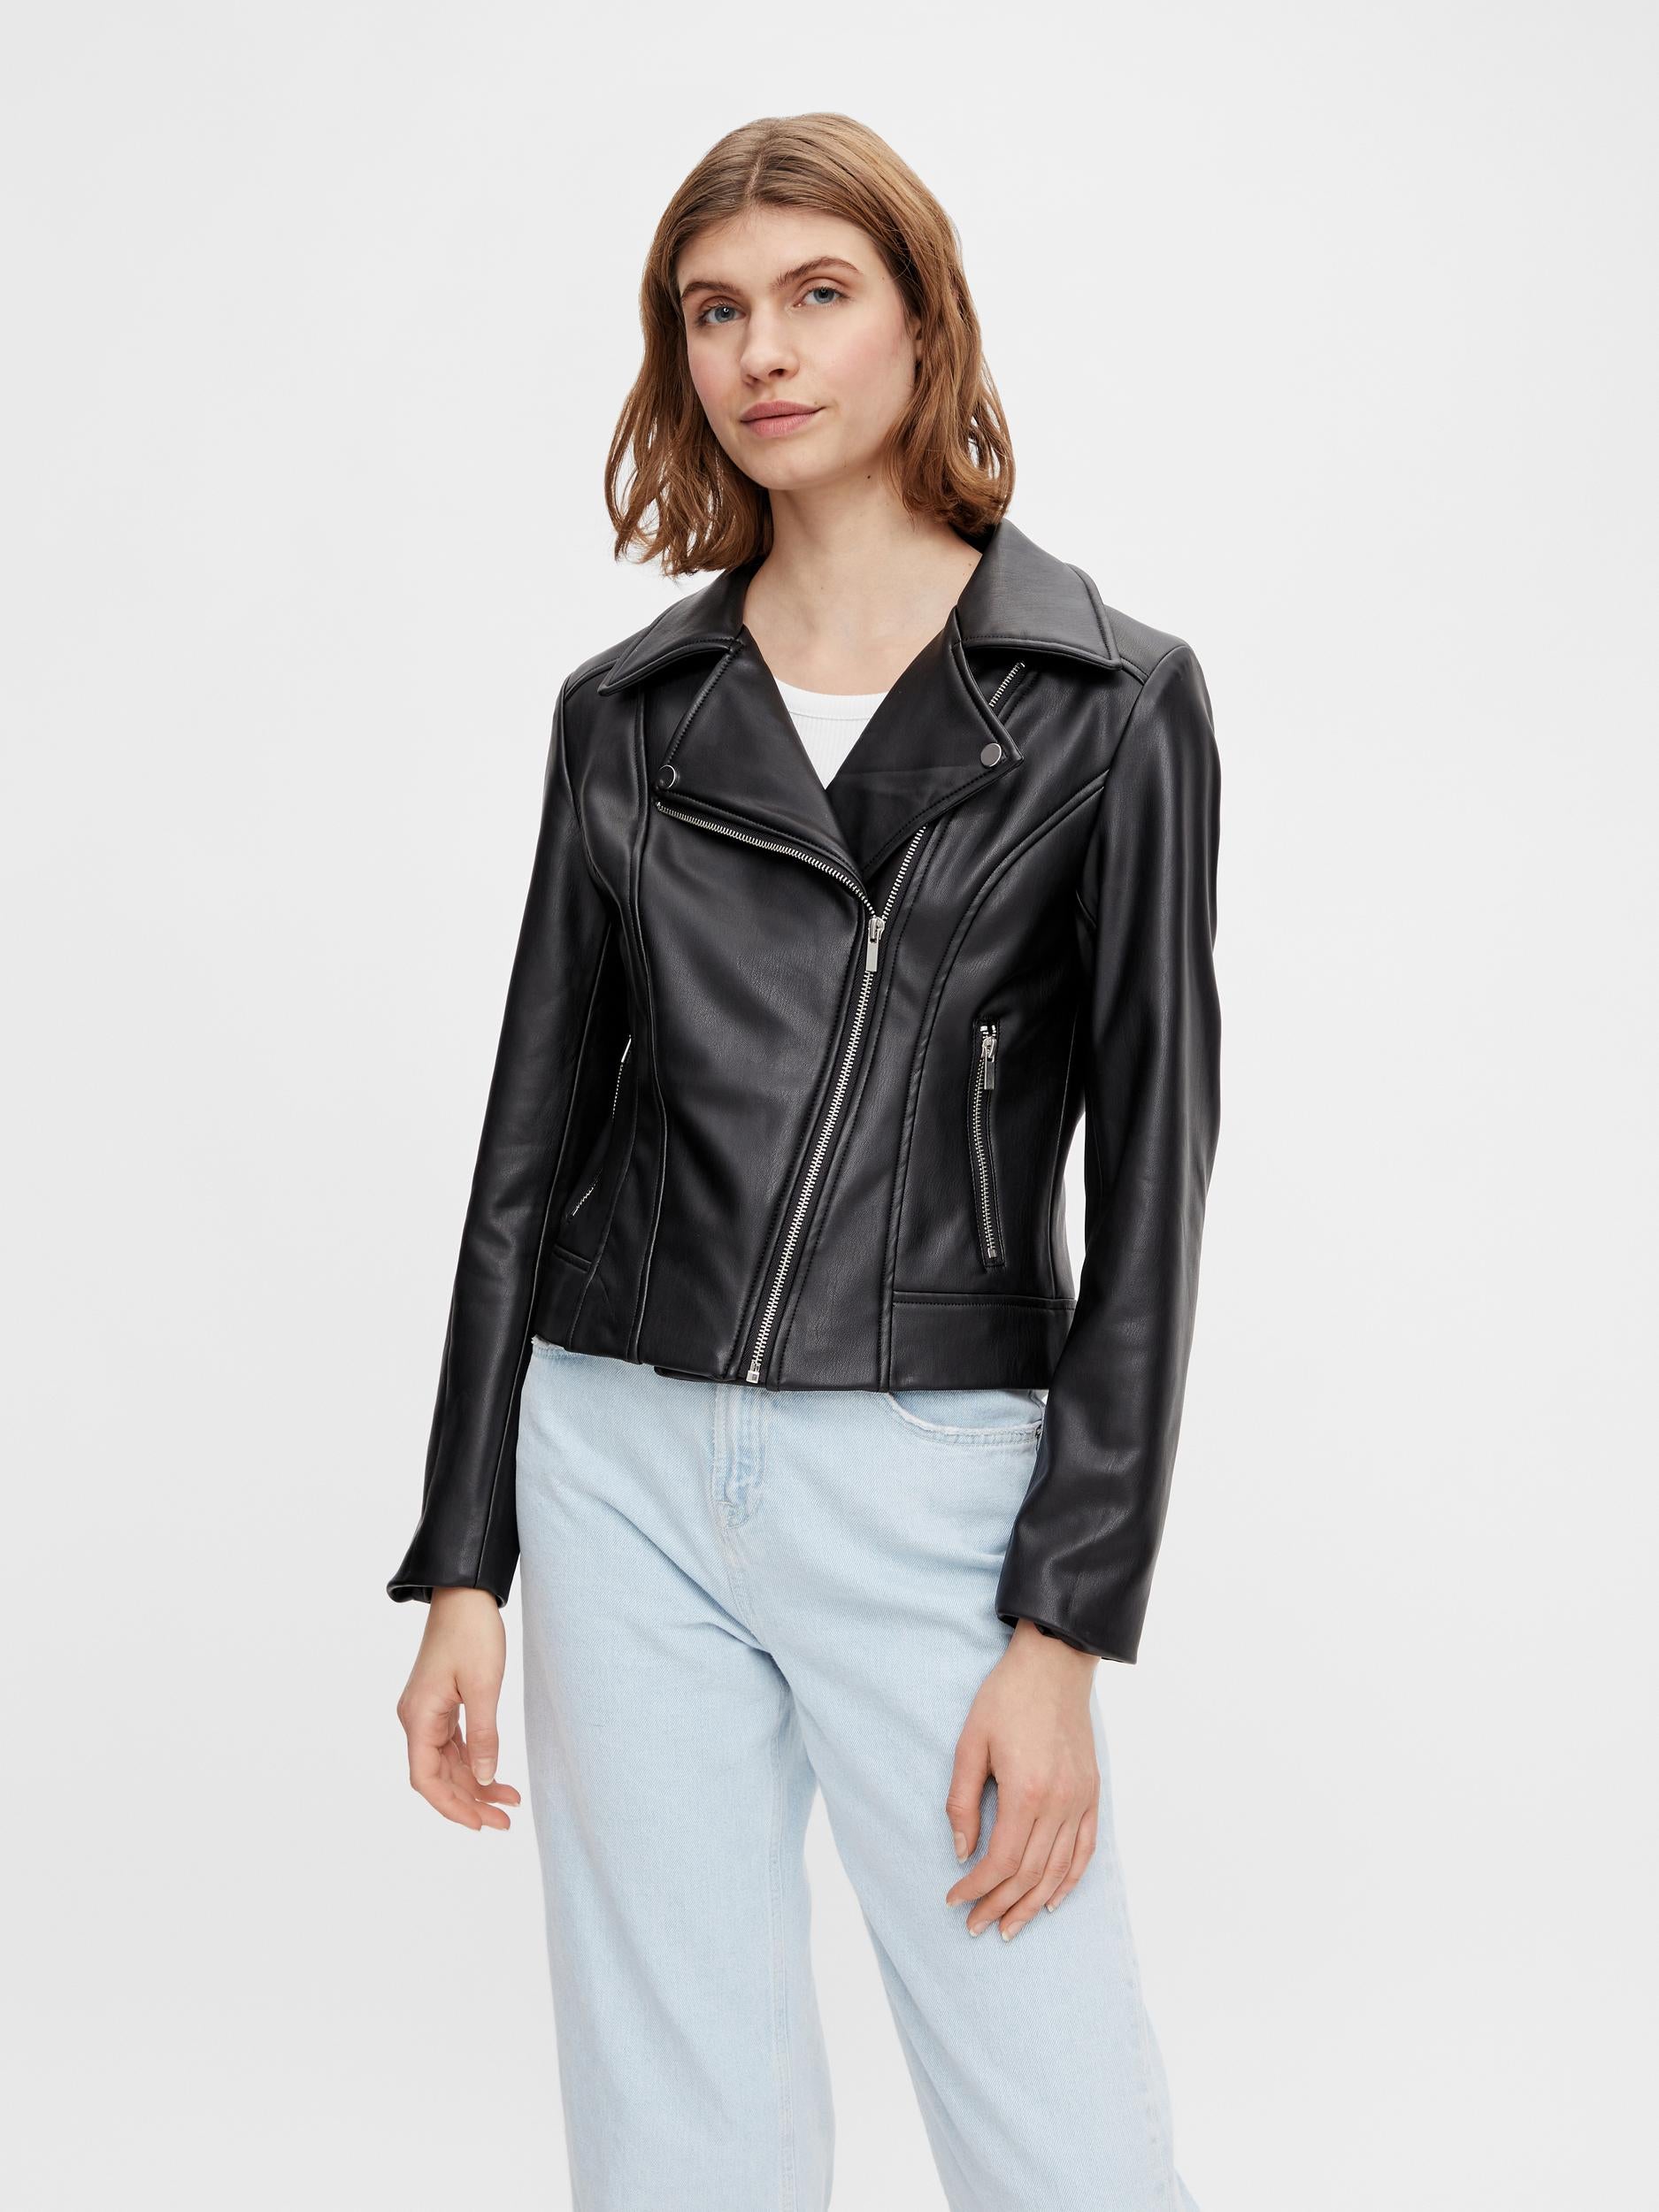 Pieces black cropped faux leather jacket